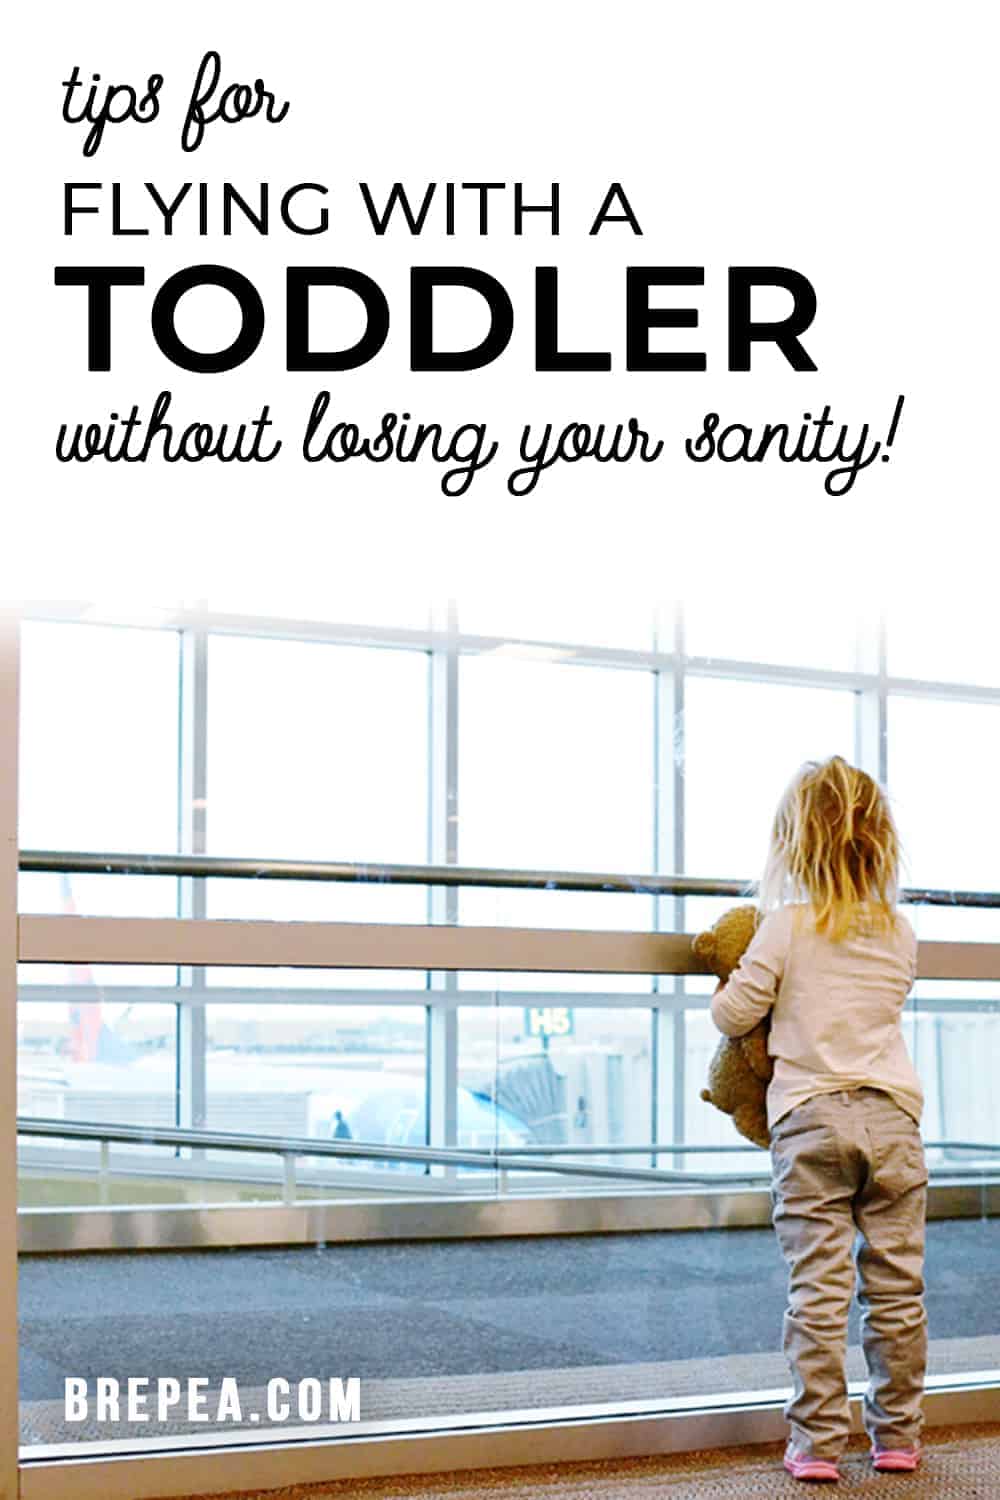 Tips for Flying With Toddlers